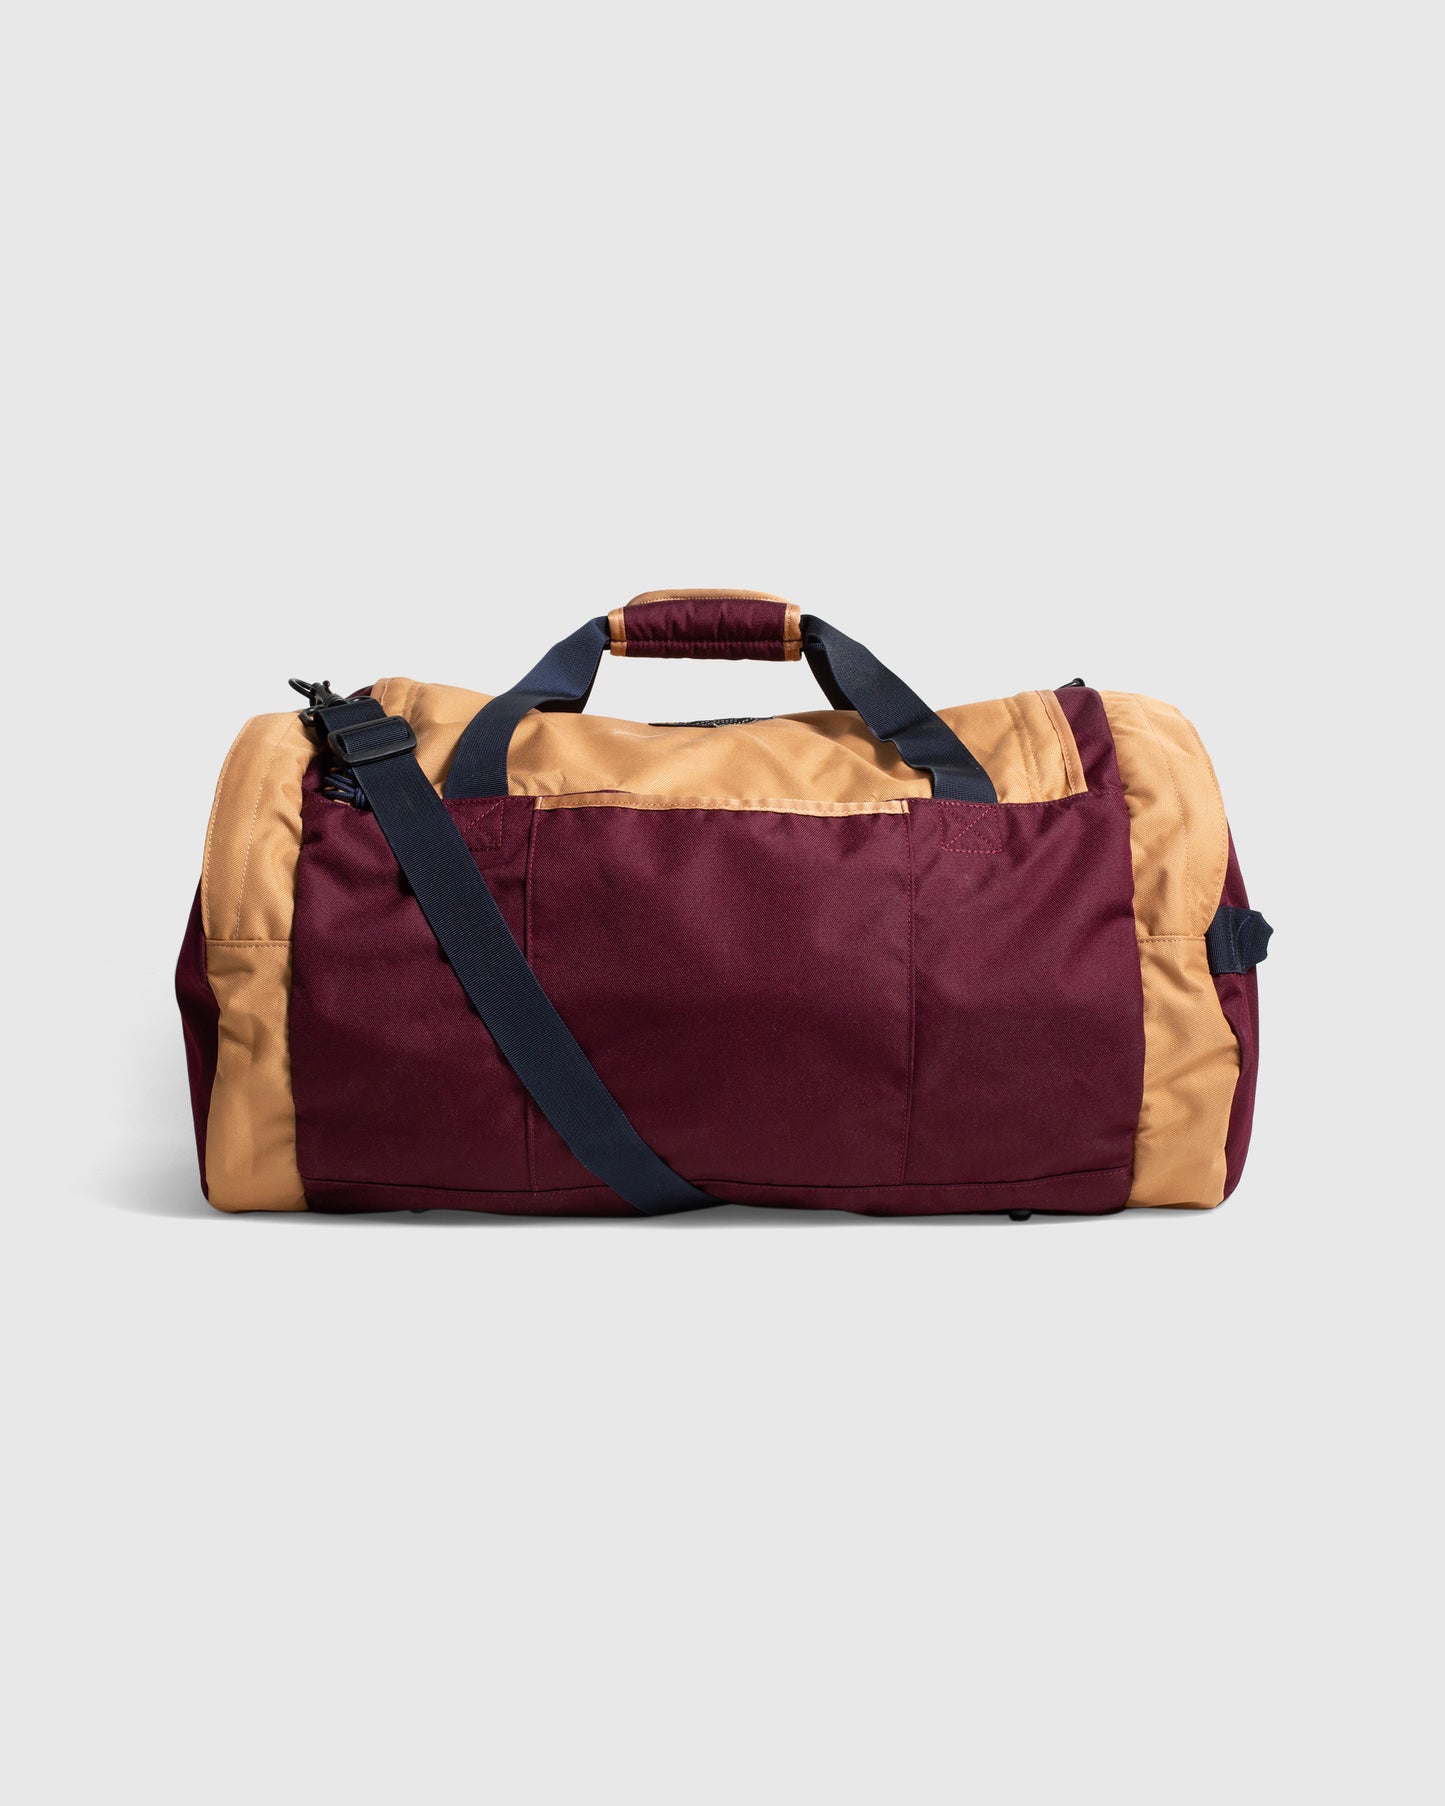 Back of duffle bag by United by Blue